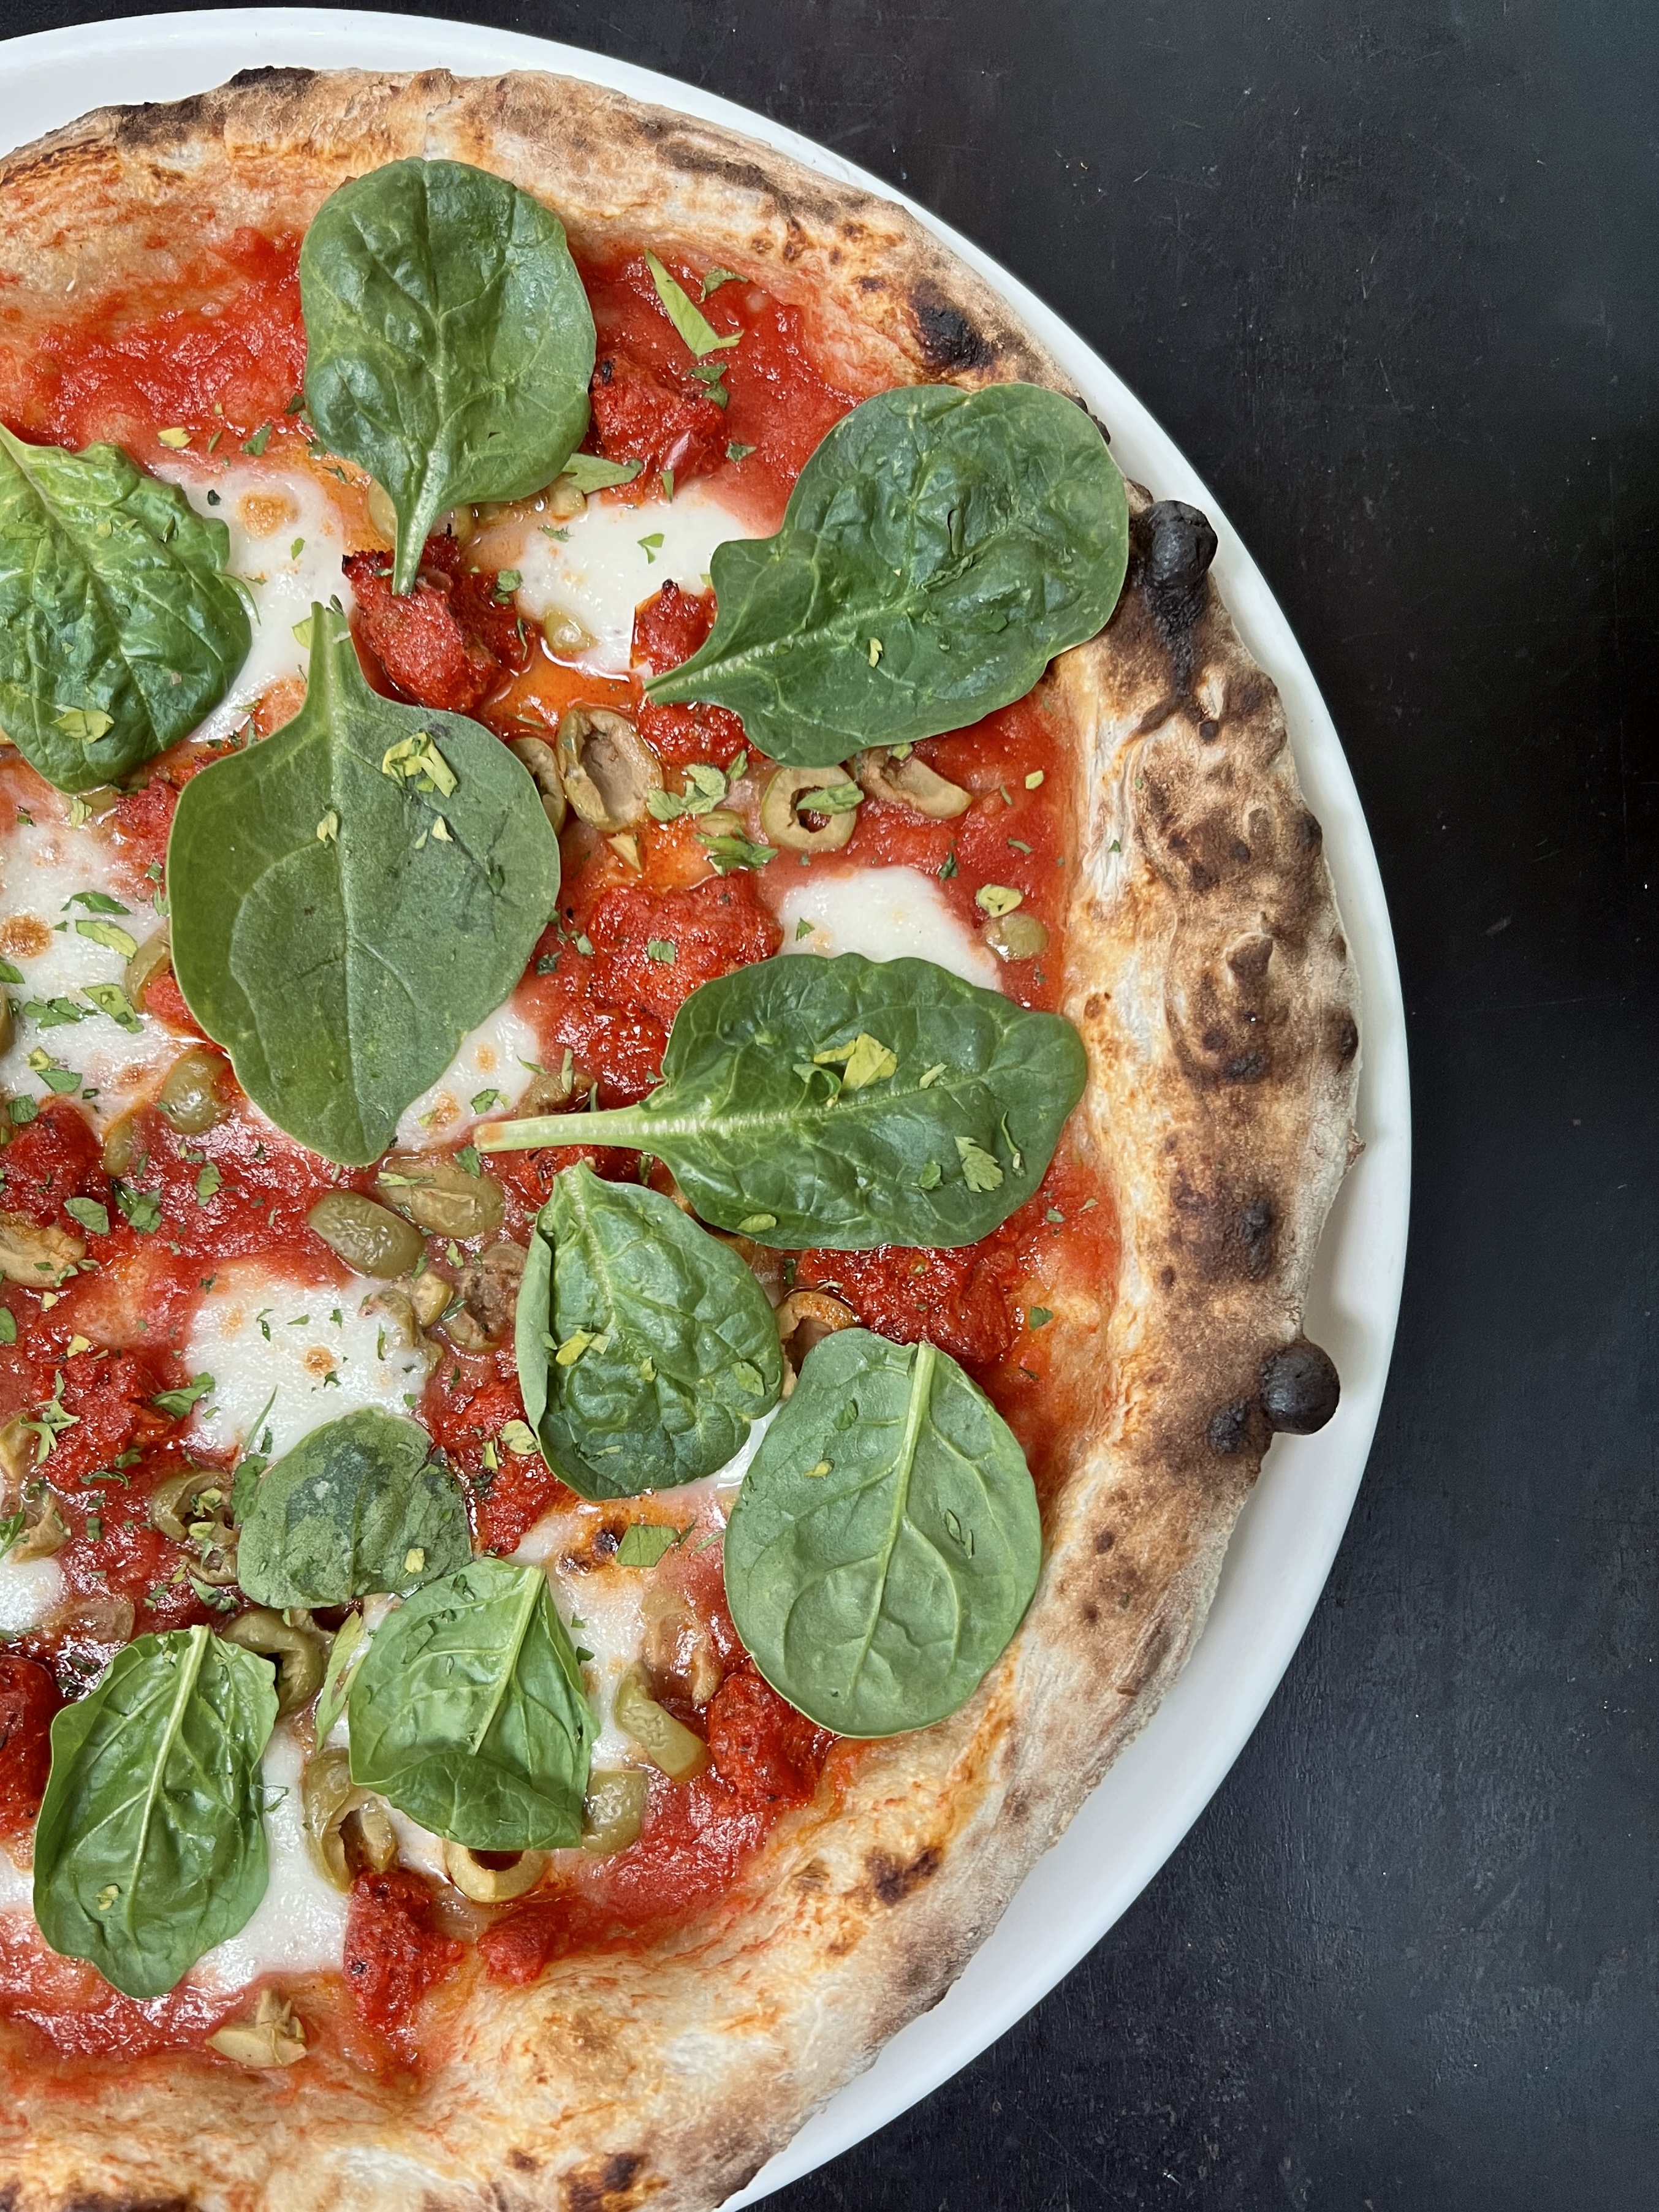 October's Special - Nduja Sausage Pizza